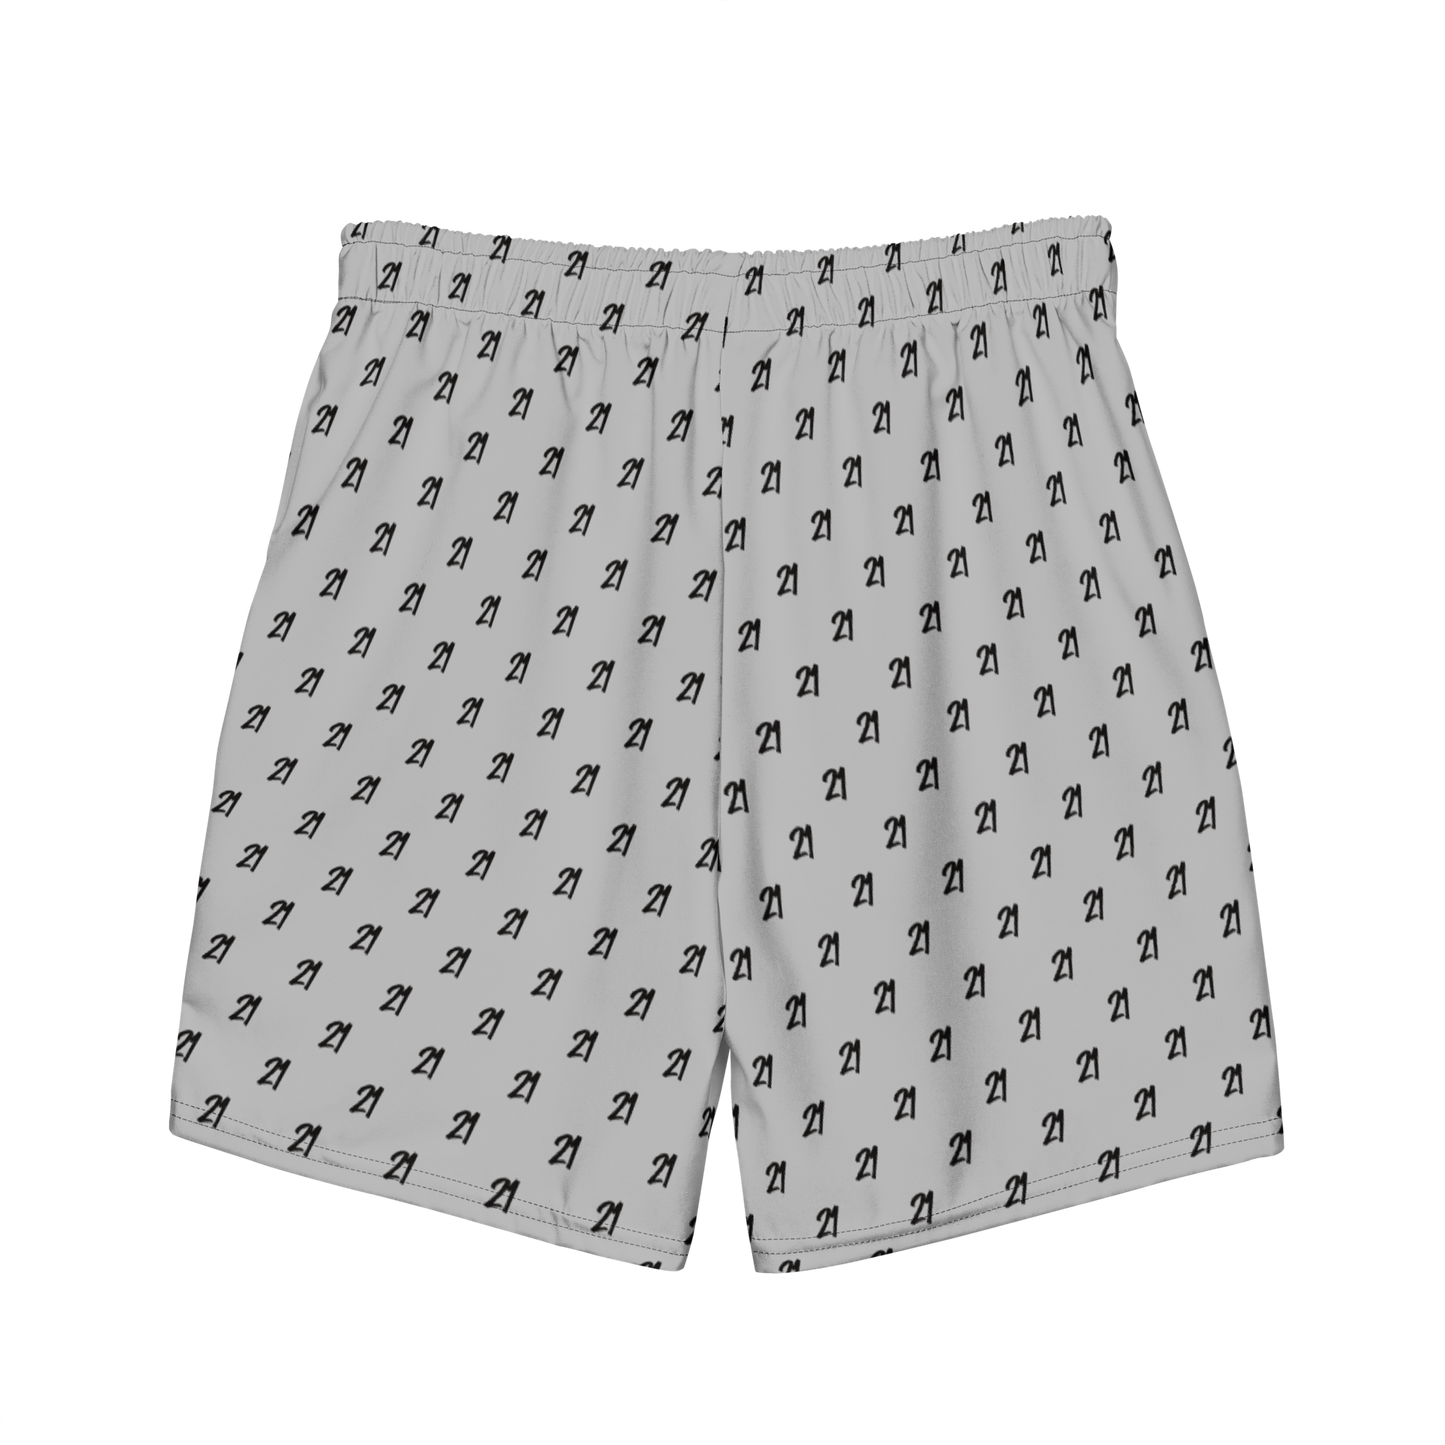 Front view of silver bitcoin swim trunks.